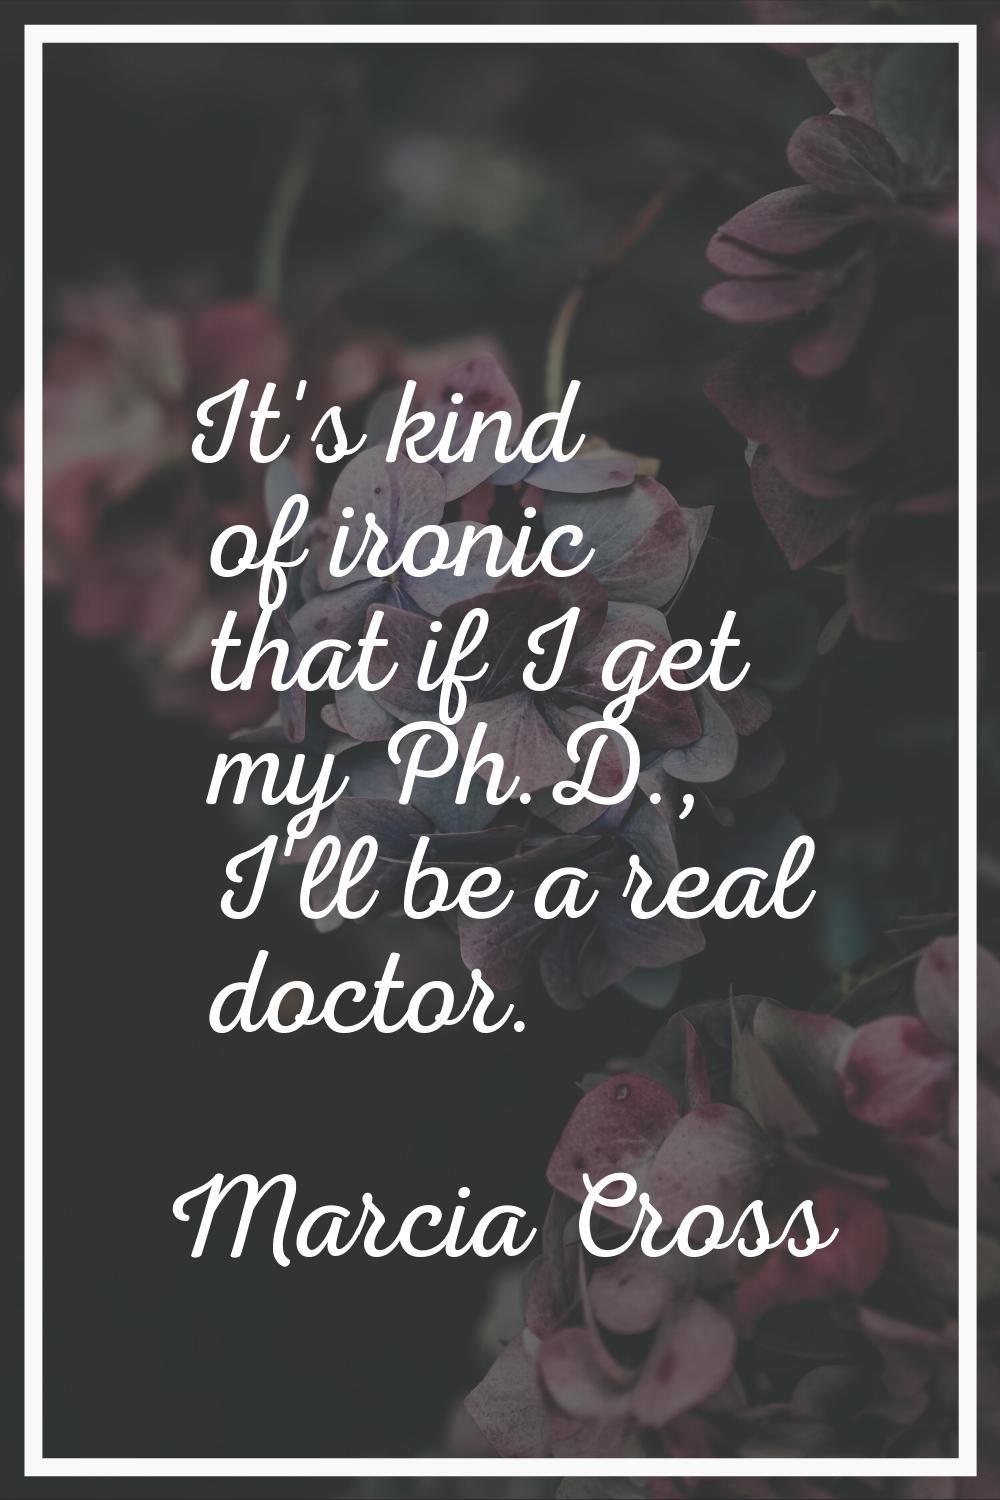 It's kind of ironic that if I get my Ph.D., I'll be a real doctor.